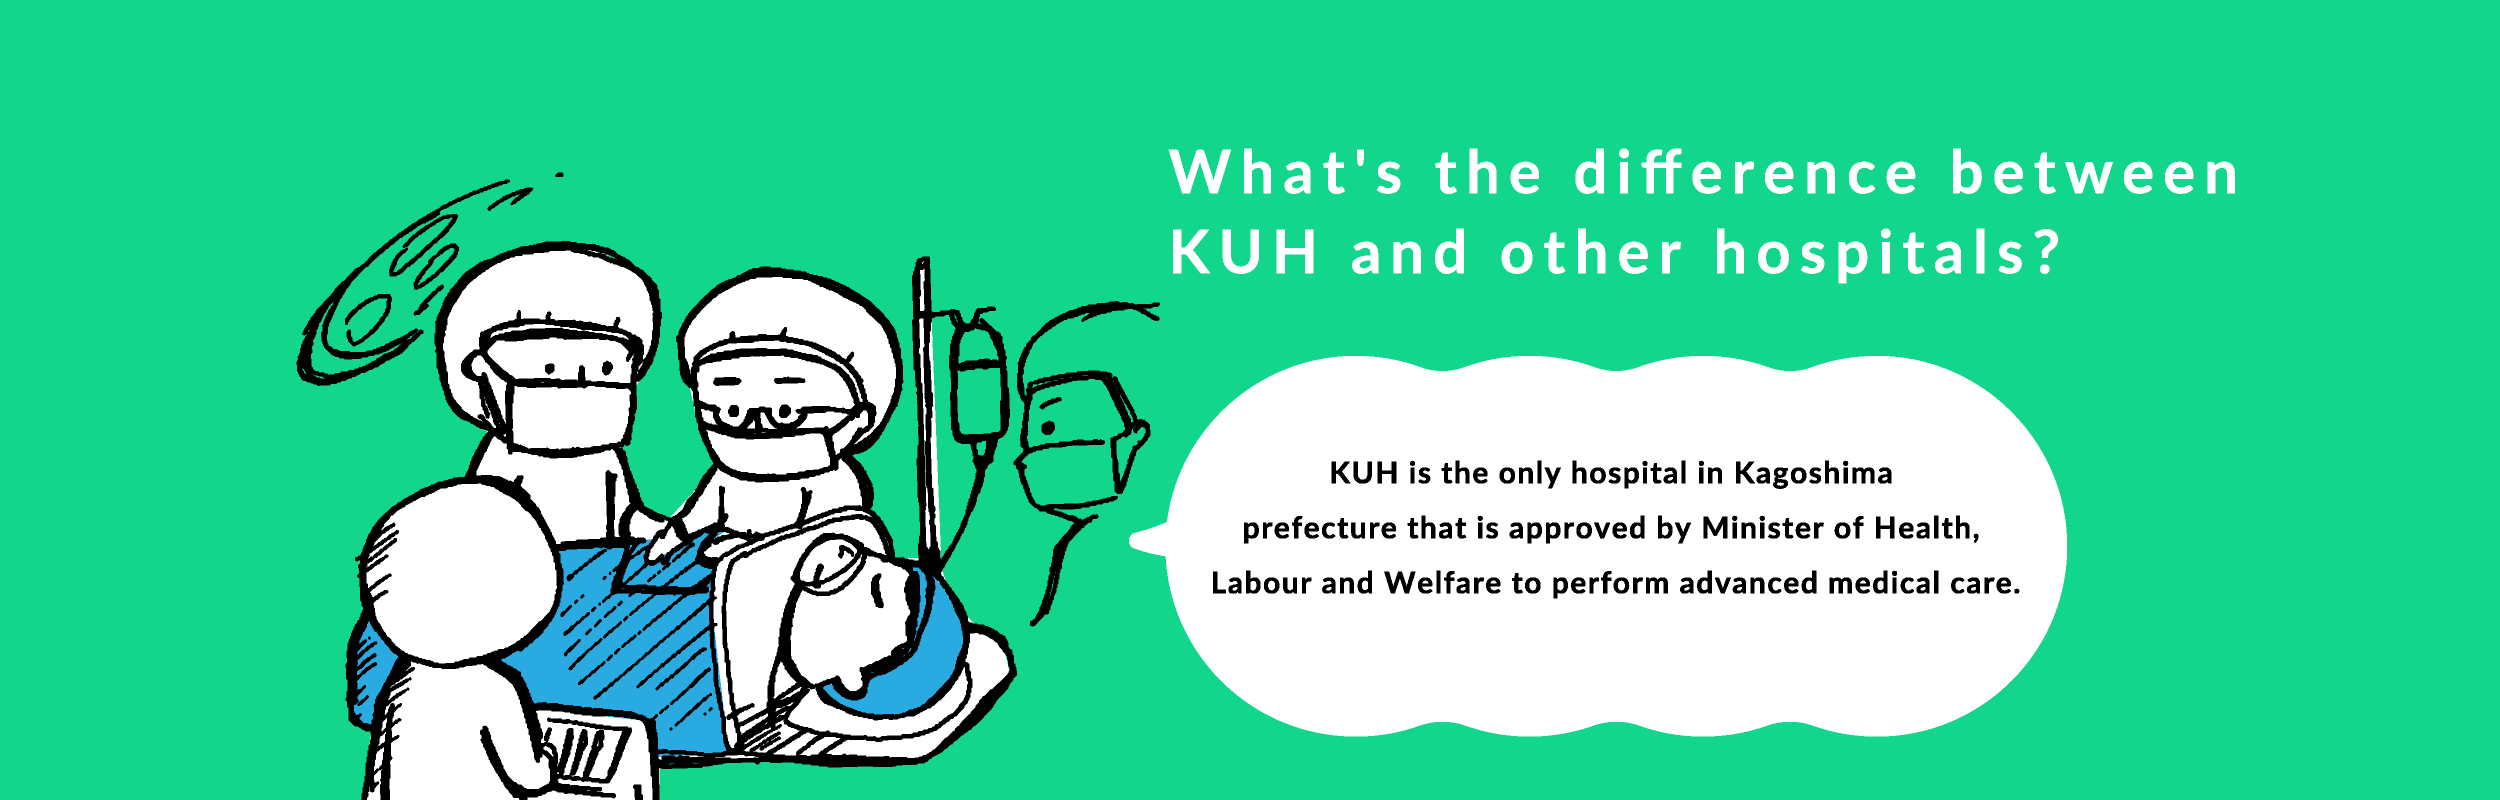 KUH is the only hospital in Kagoshima prefecture that is approved by Minister of Health, Labour and Welfare to perform advanced medical care.